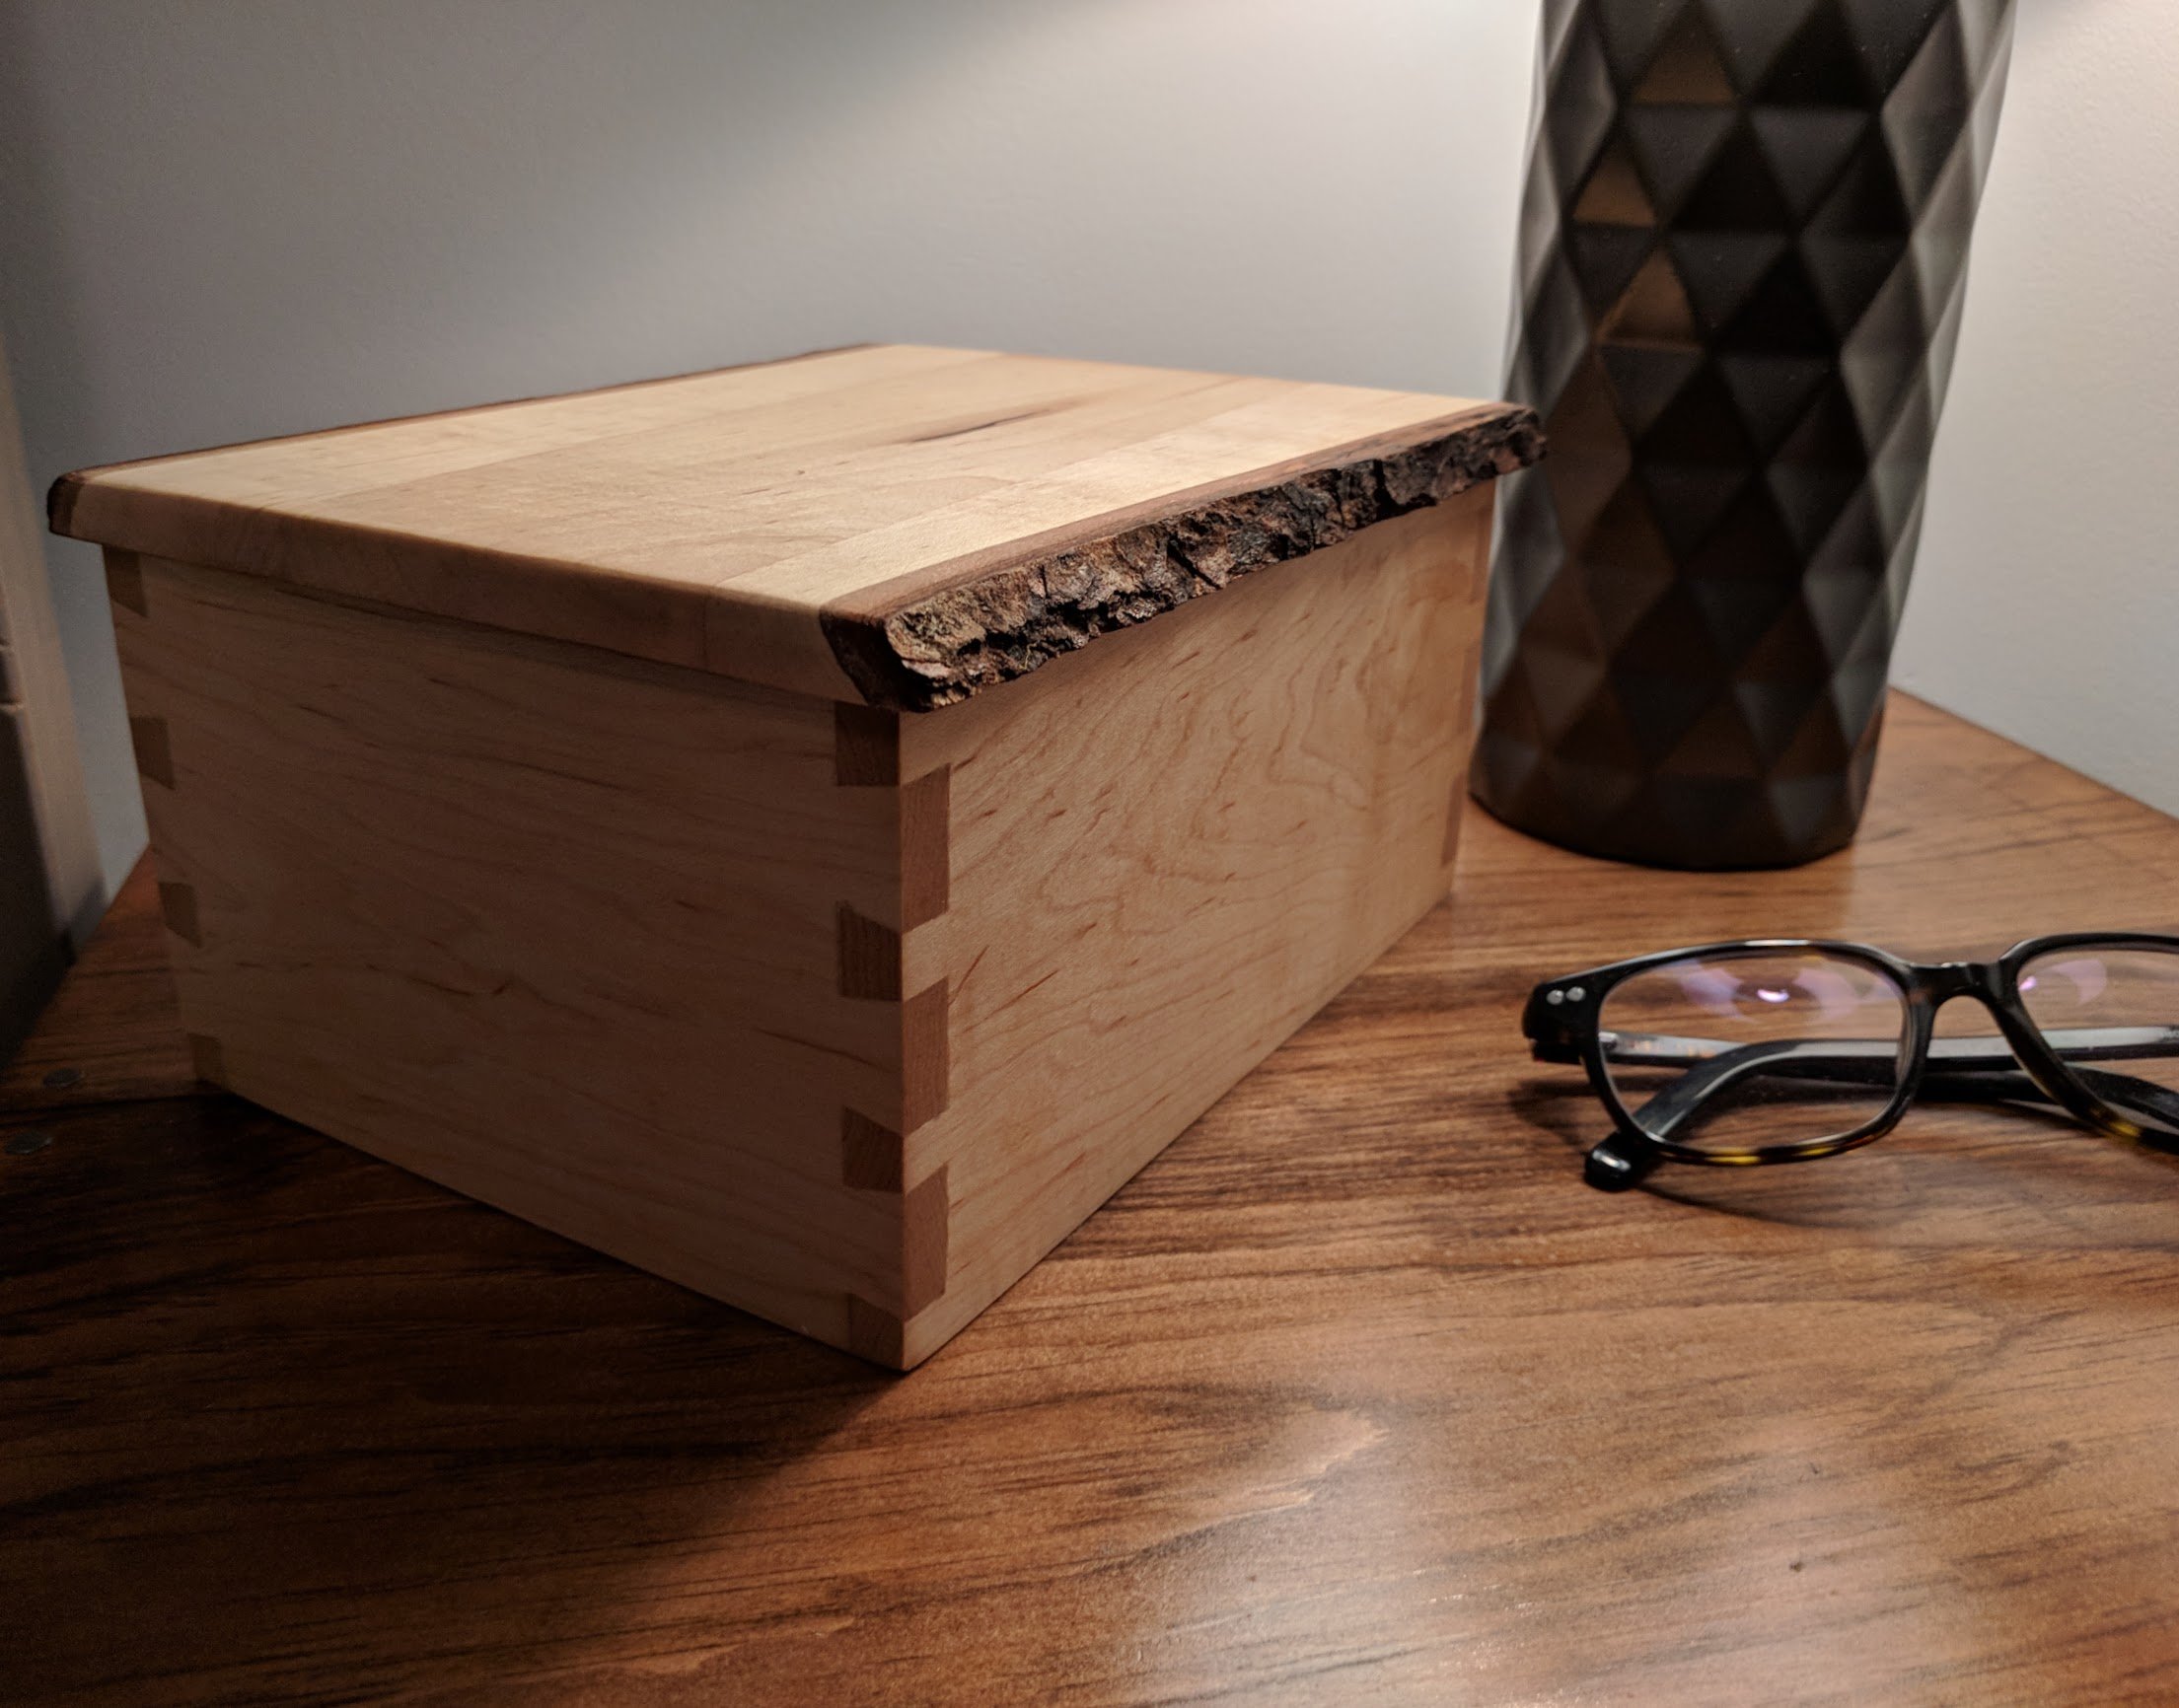 Living edge maple dovetail box, with hand cut dovetails